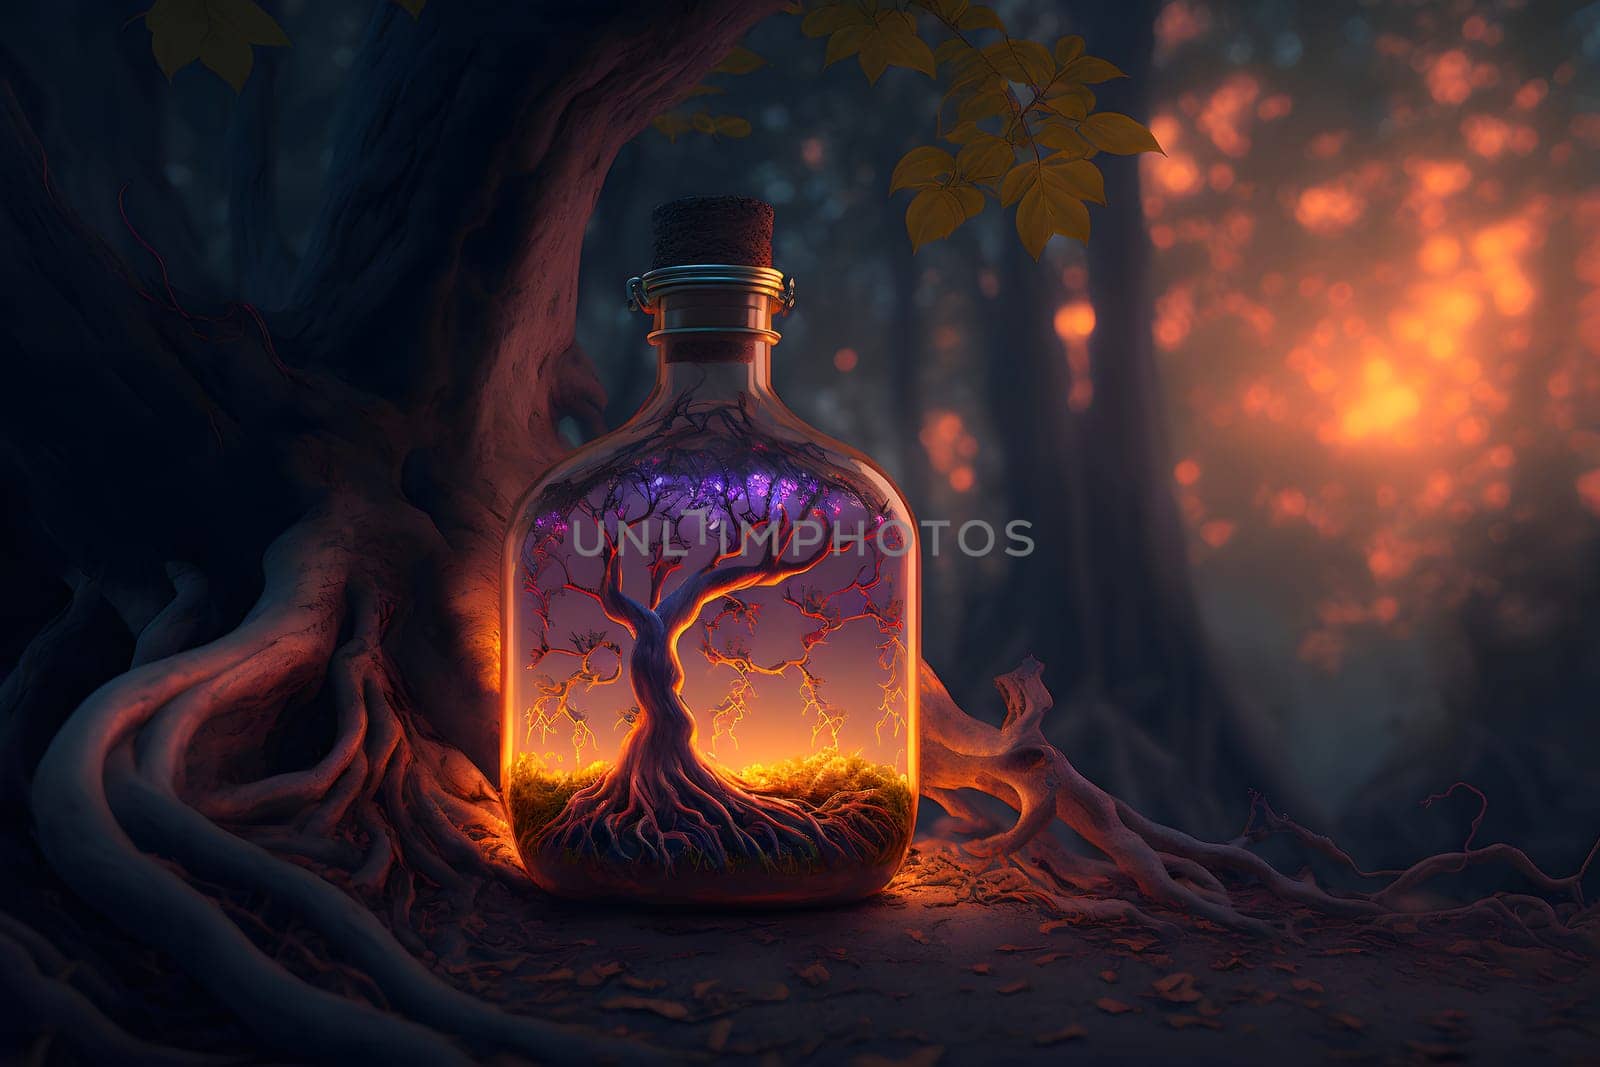 glowing potion bottle with magic tree inside on night forest ground, neural network generated art. Digitally generated image. Not based on any actual person, scene or pattern.